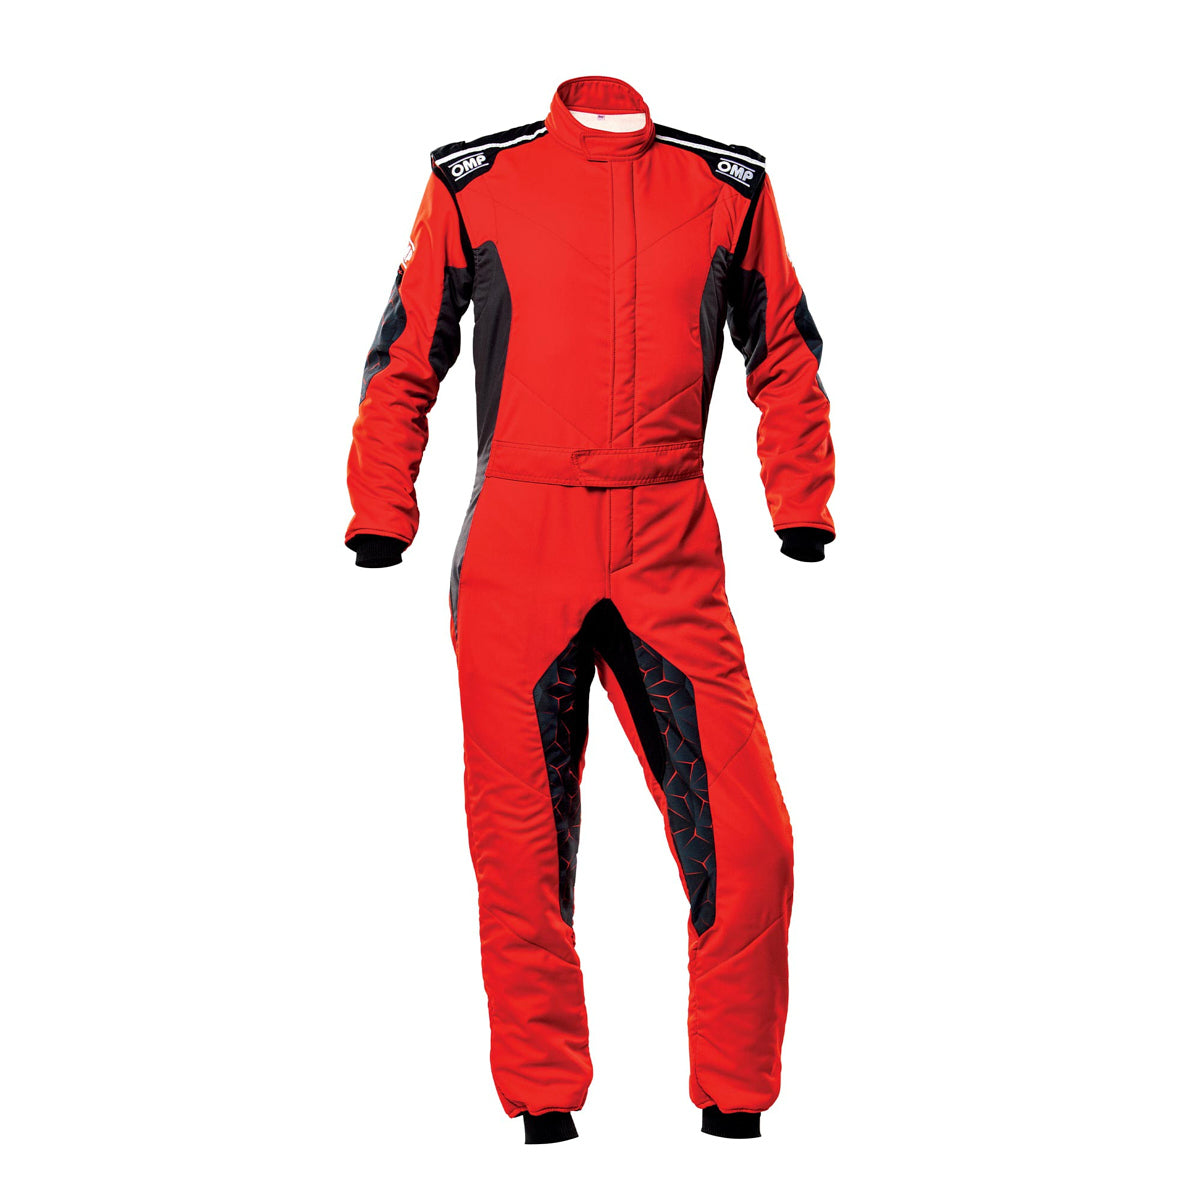 Tecnica Hybrid Suit Red and Black Size 54